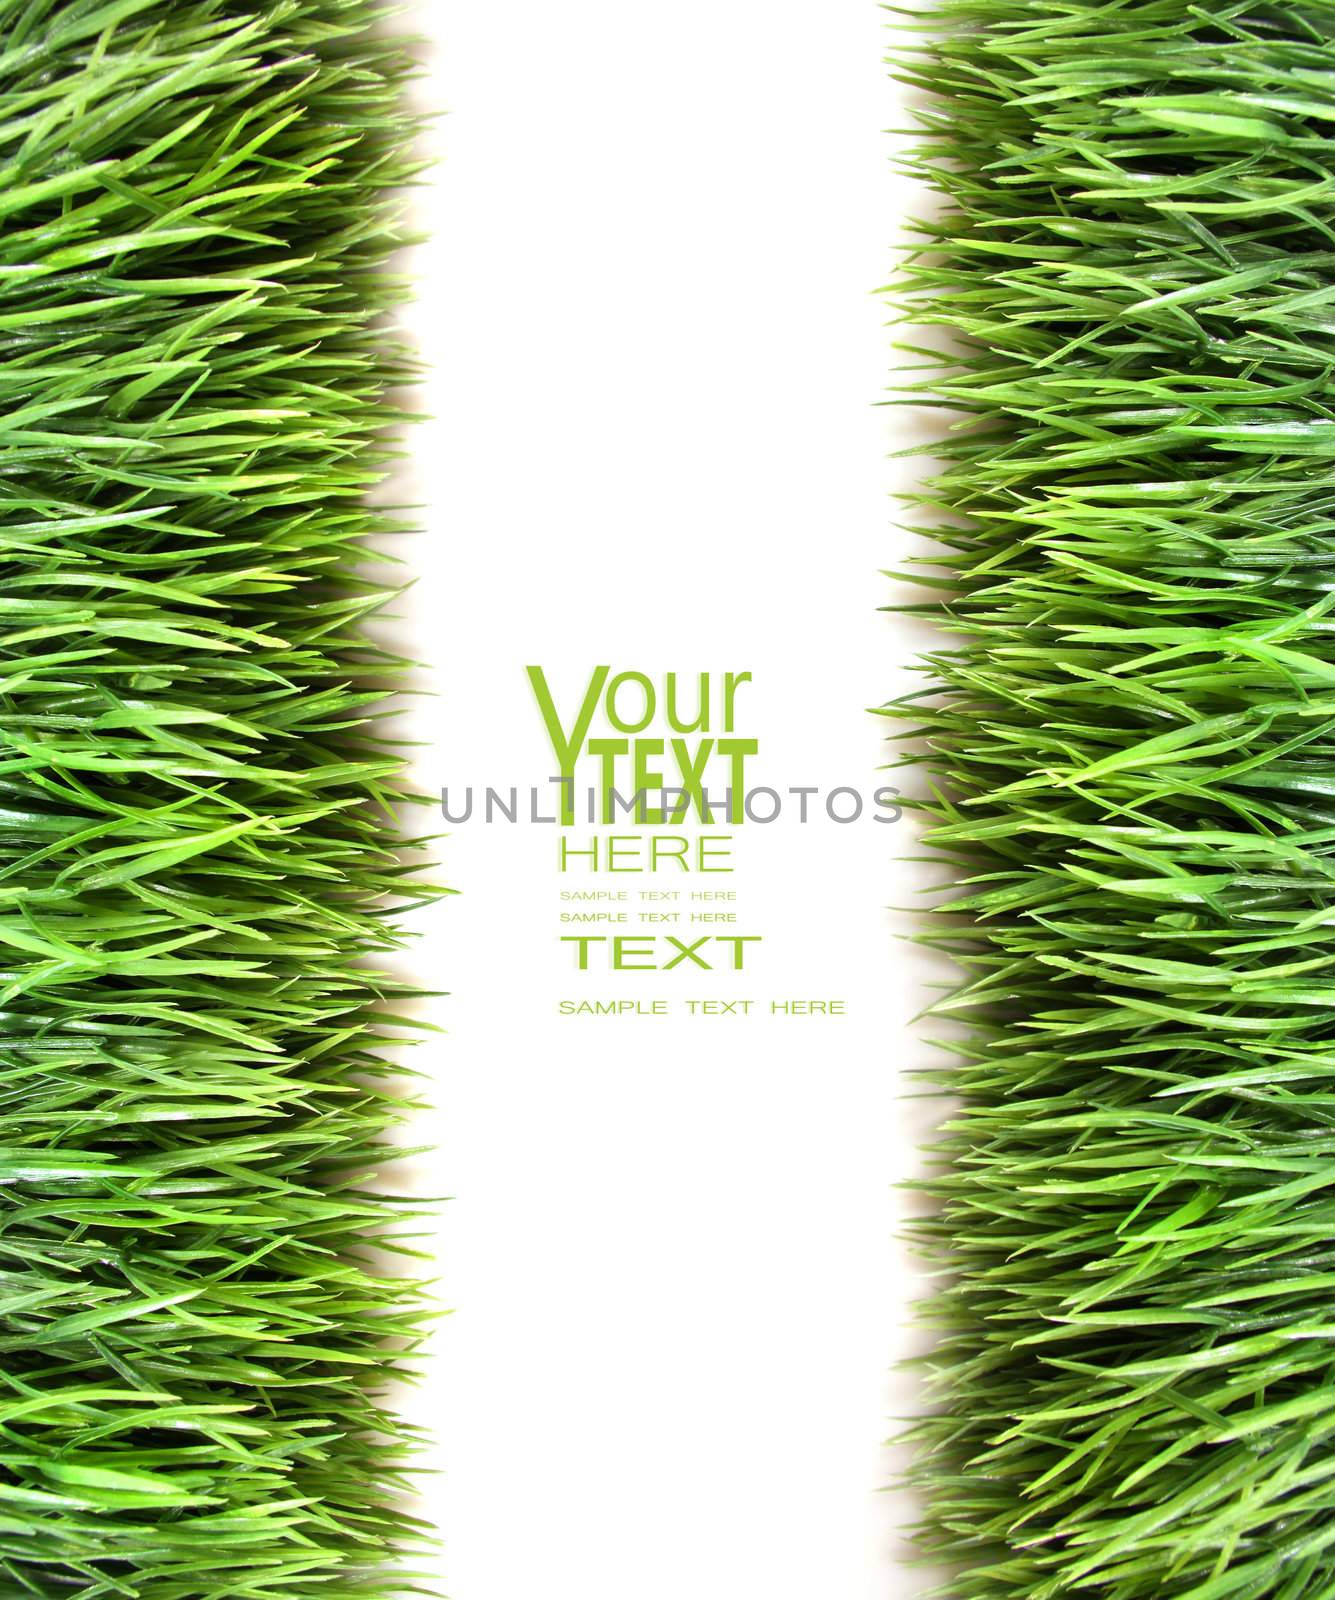 Overview of grass on white background by Sandralise